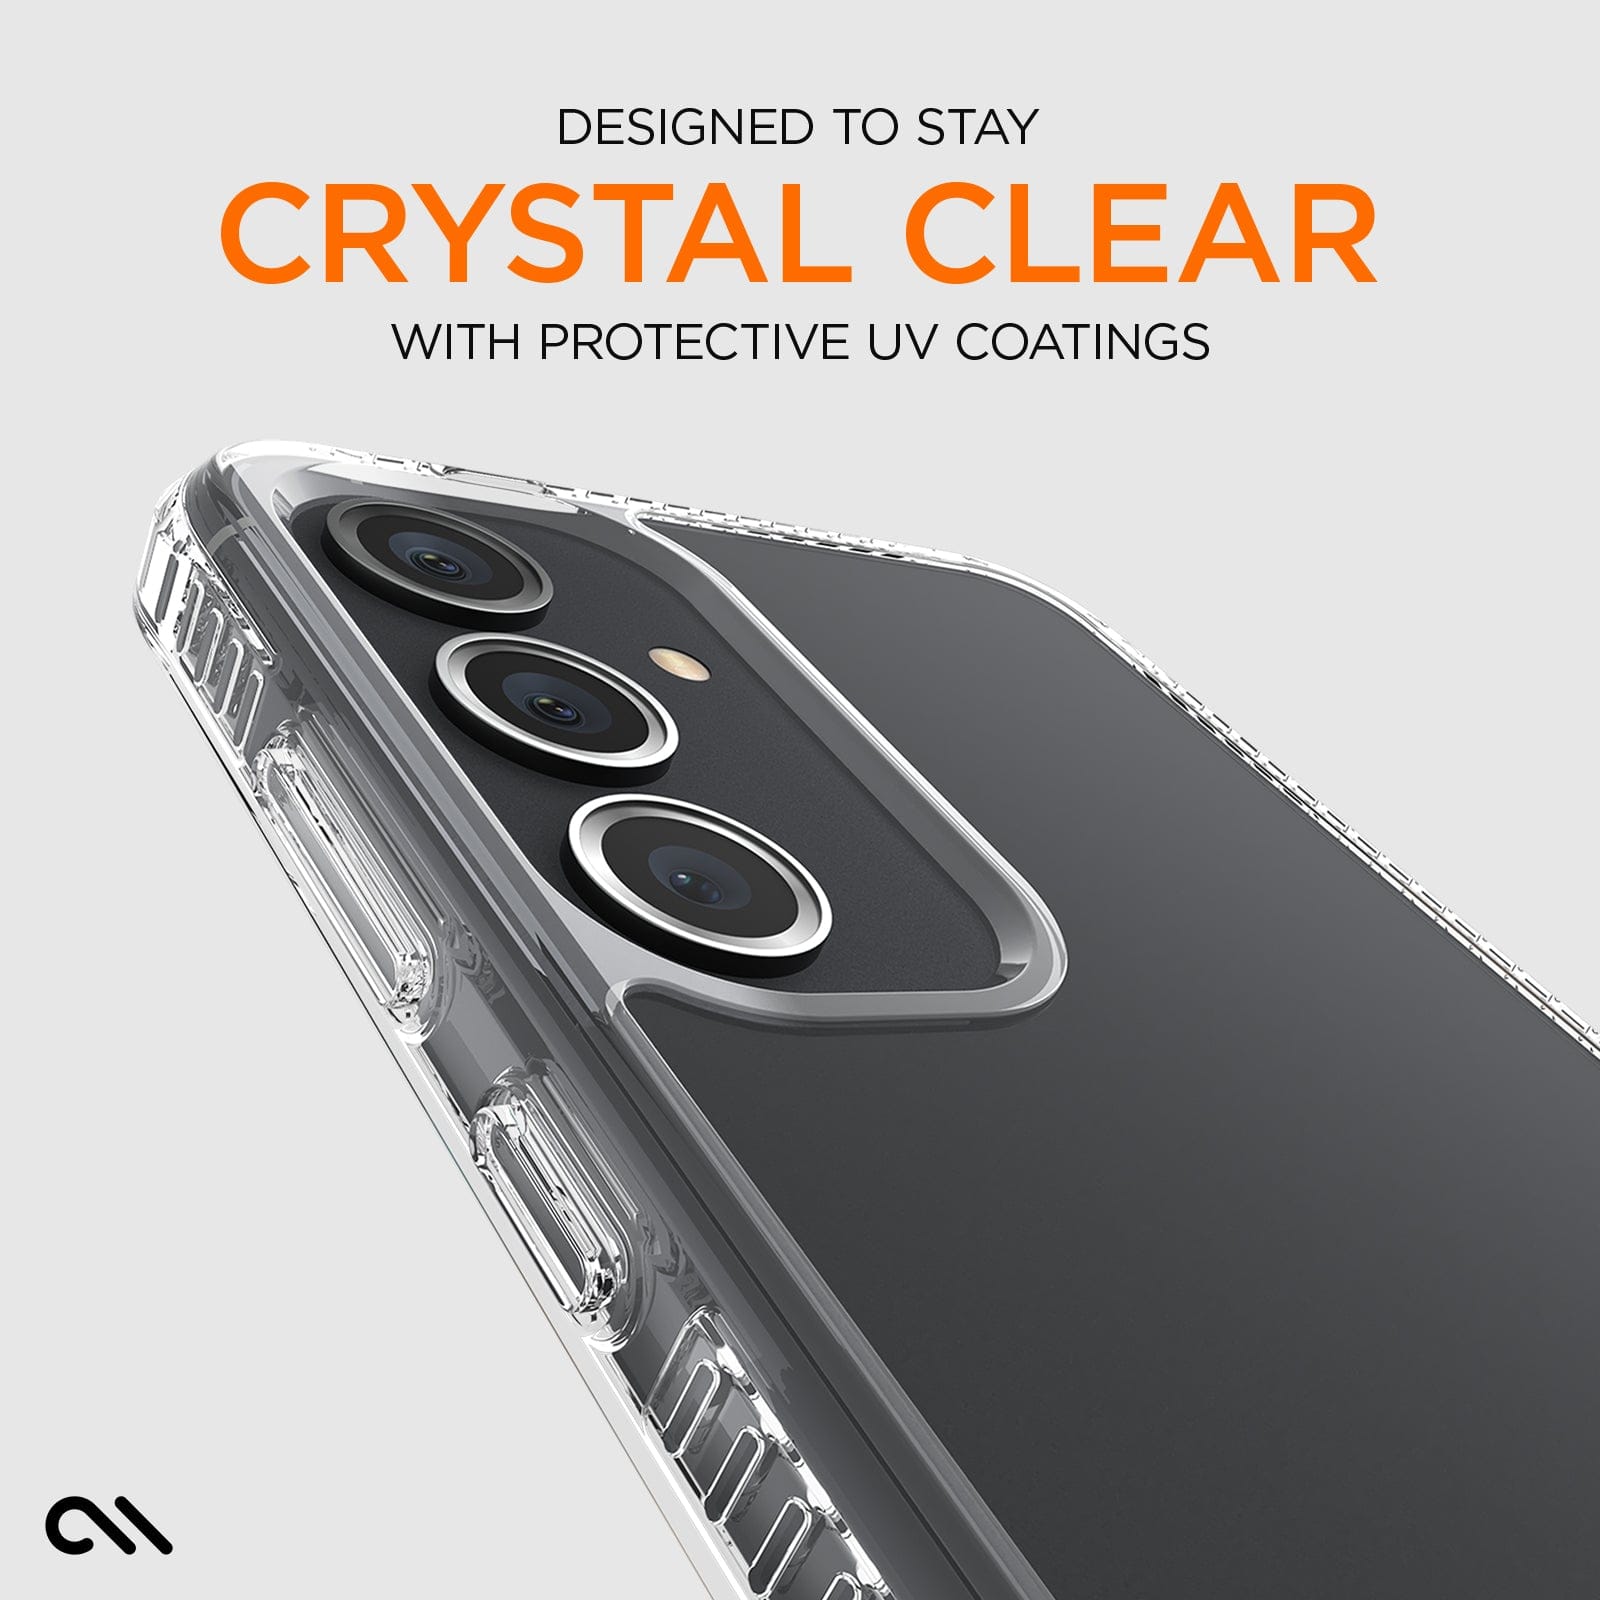 DESIGNED TO STAY CRYSTAL CLEAR WITH PROTECTIVE UV COATINGS